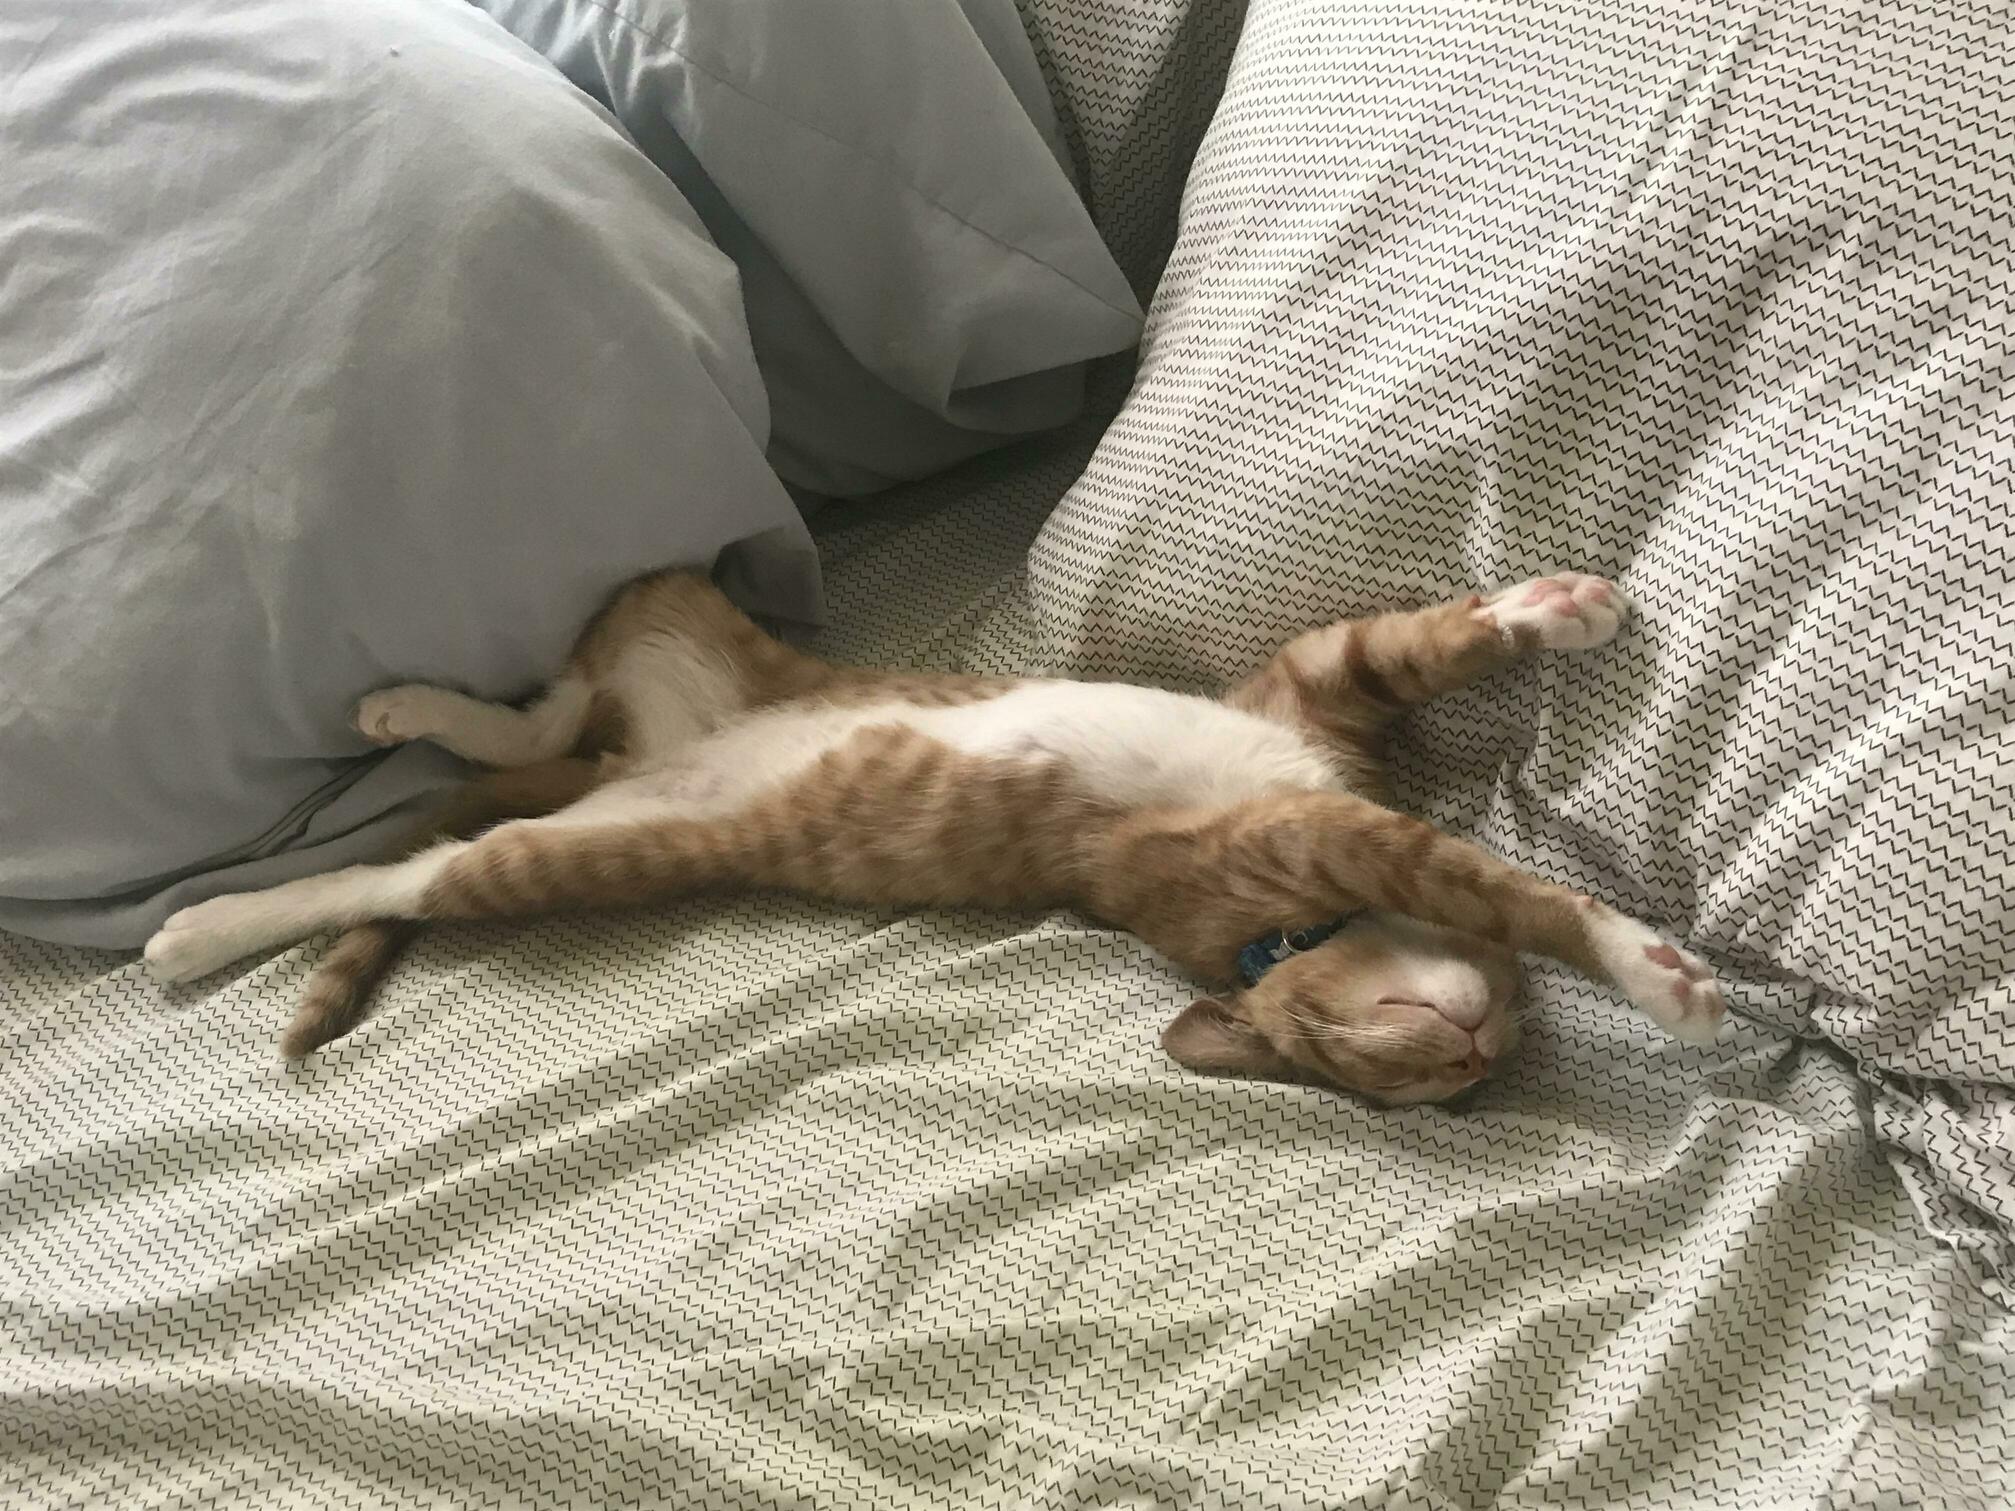 I think its safe to say my new kitten is enjoying his forever home